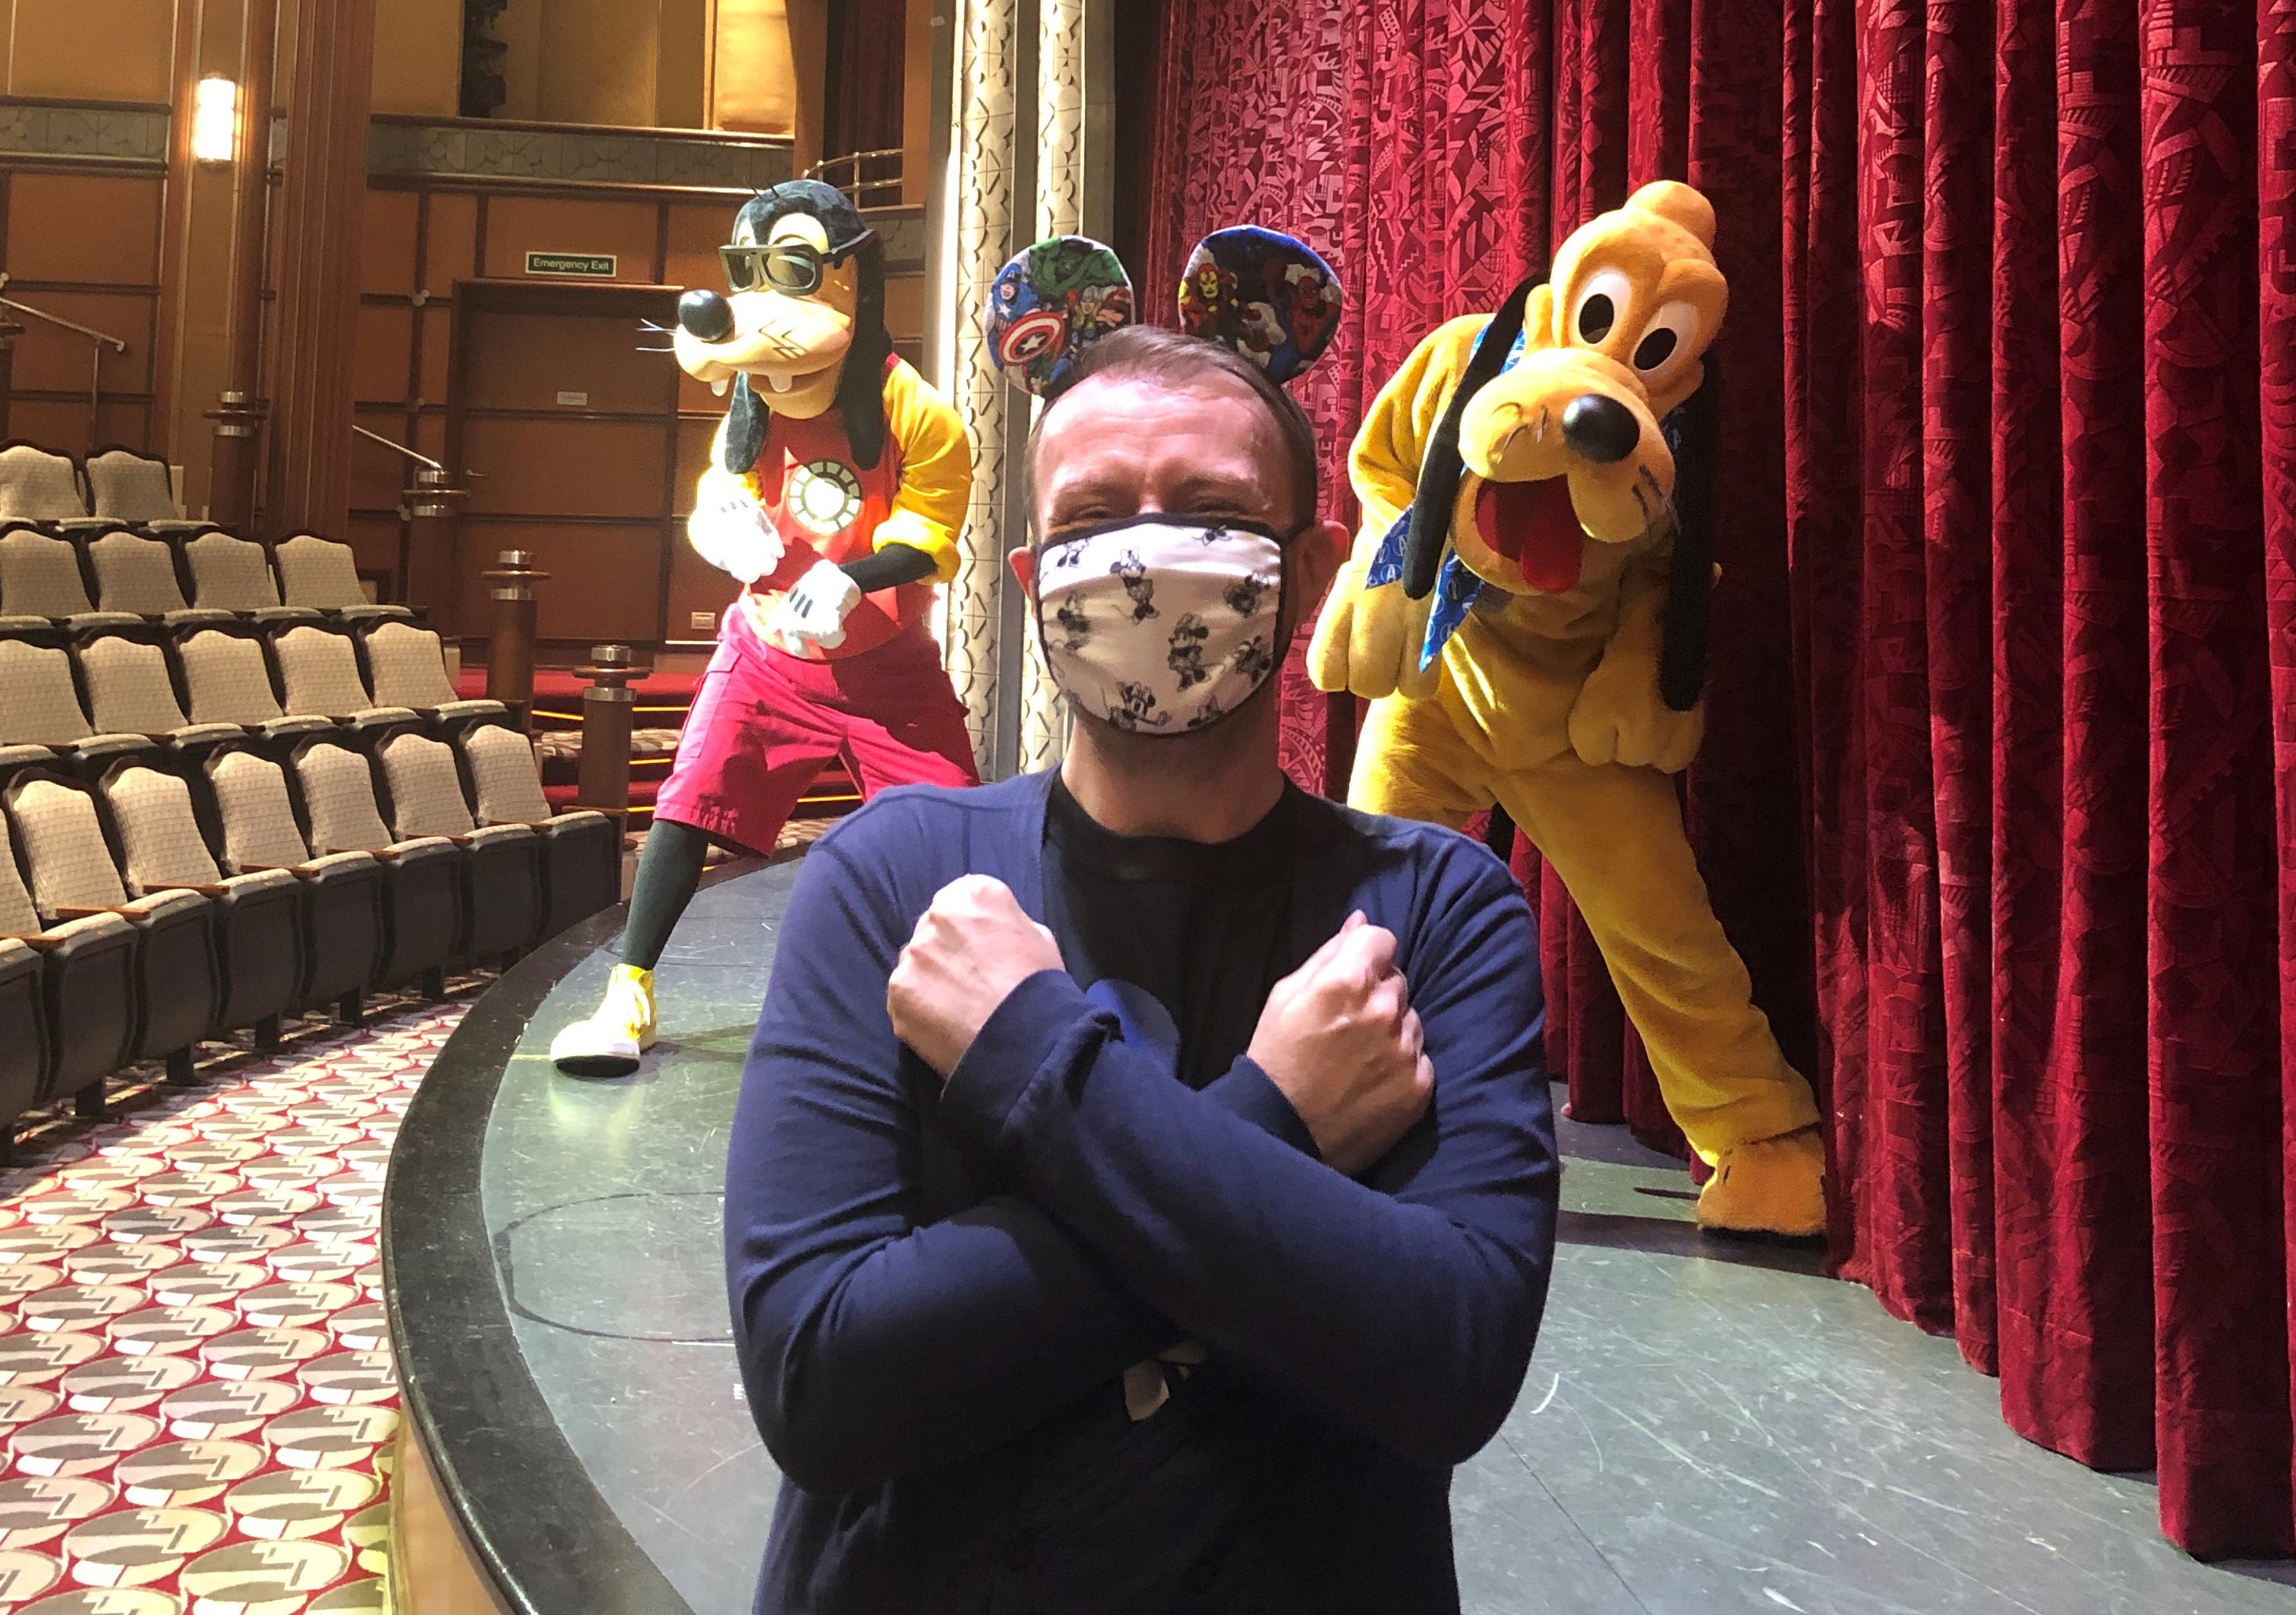 Damon Smith on a selfie spot with Goofy and Pluto in the Buena Vista Theatre of the Disney Magic (PA/Damon Smith)